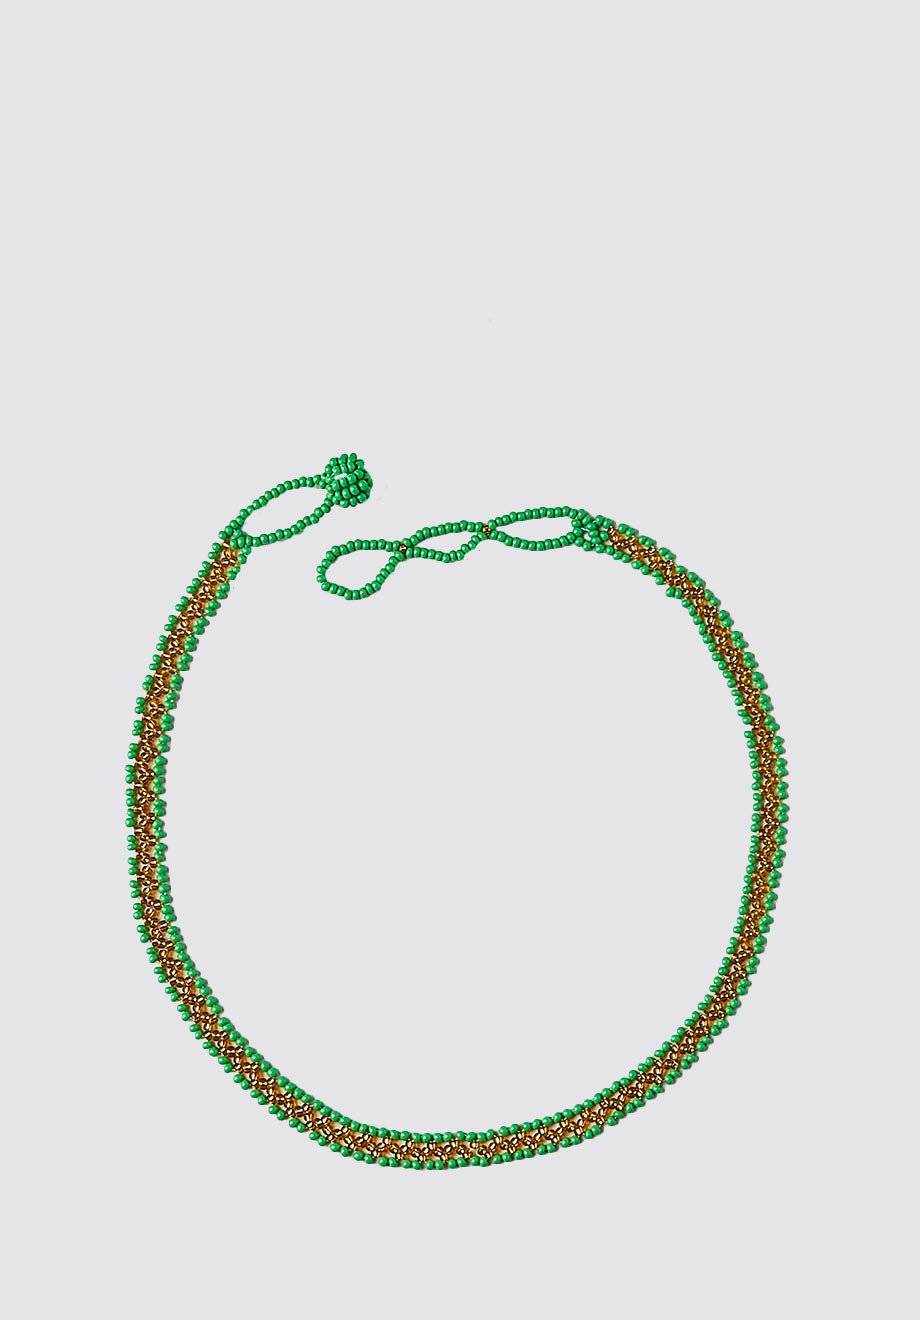 Beaded Necklace | Mathe's Green & Gold